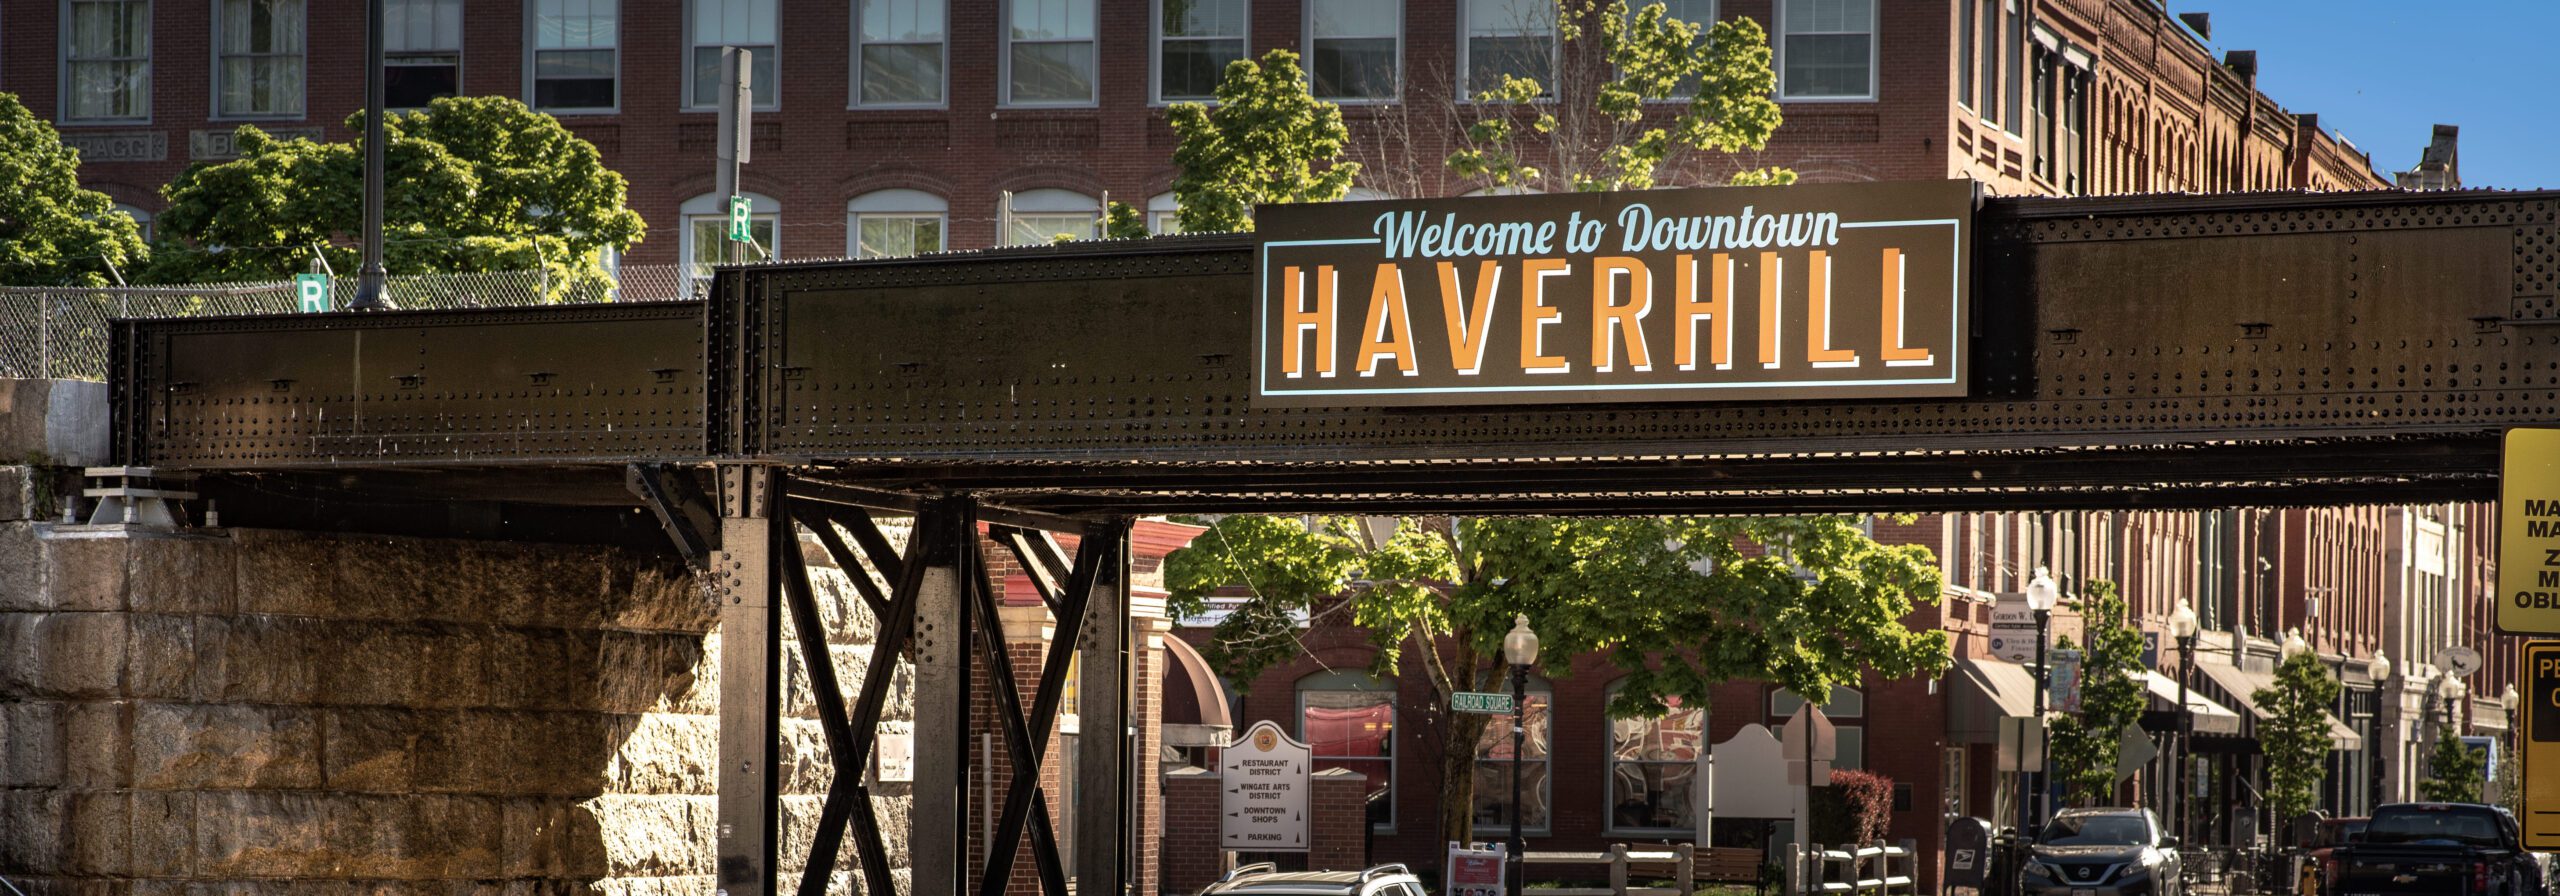 Haverhill MA Downtown, Why Buy a house in Haverhill.